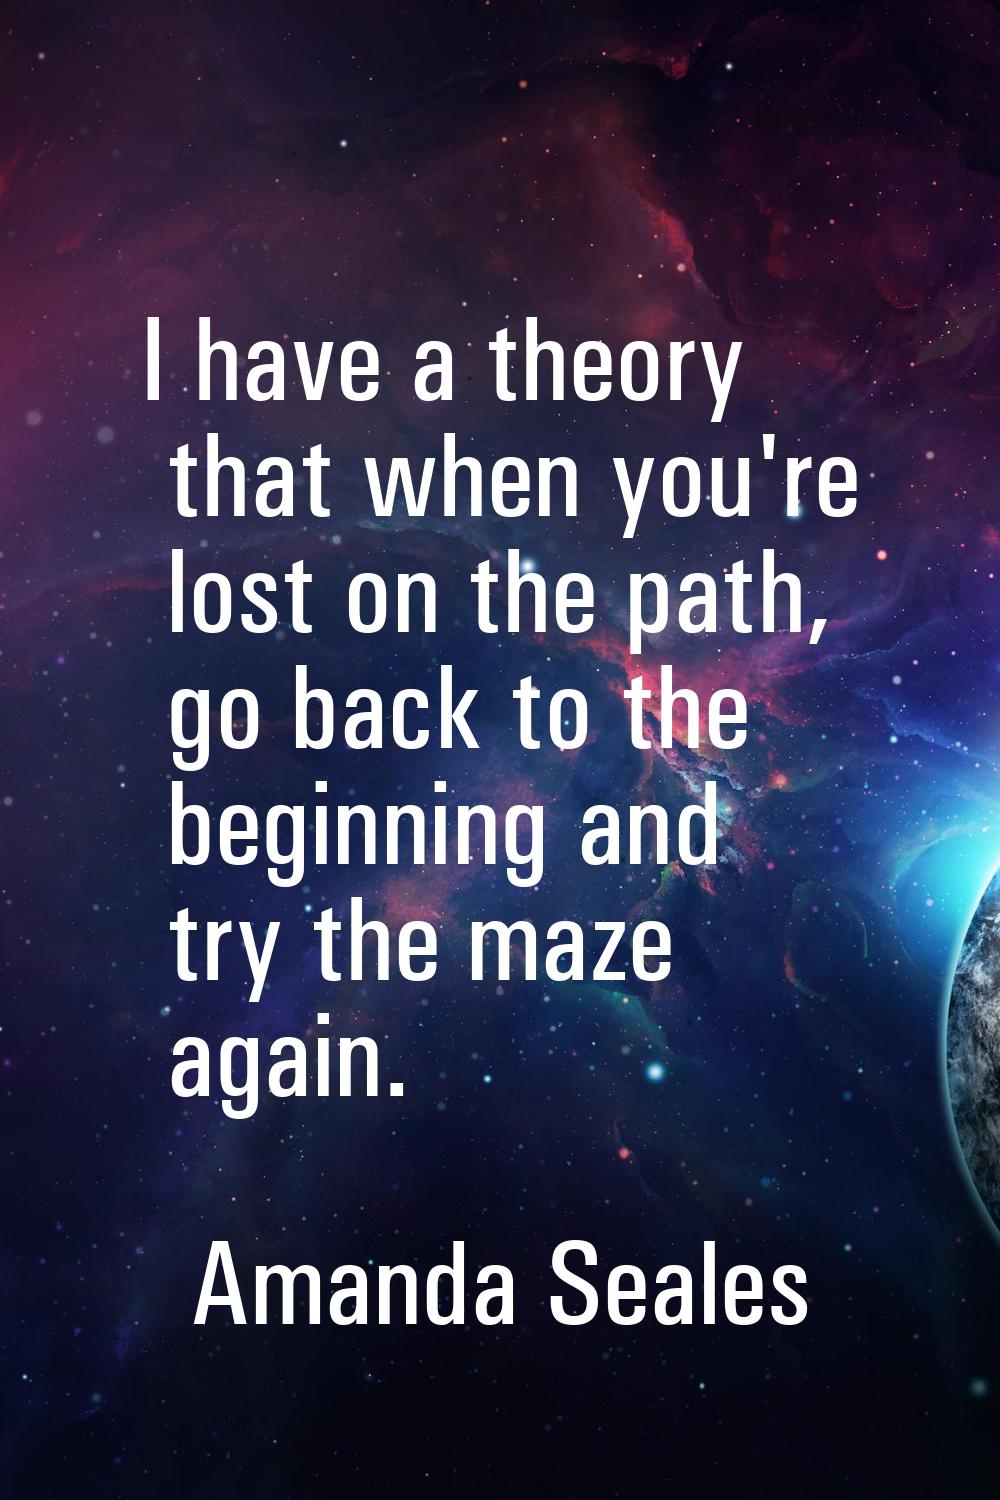 I have a theory that when you're lost on the path, go back to the beginning and try the maze again.